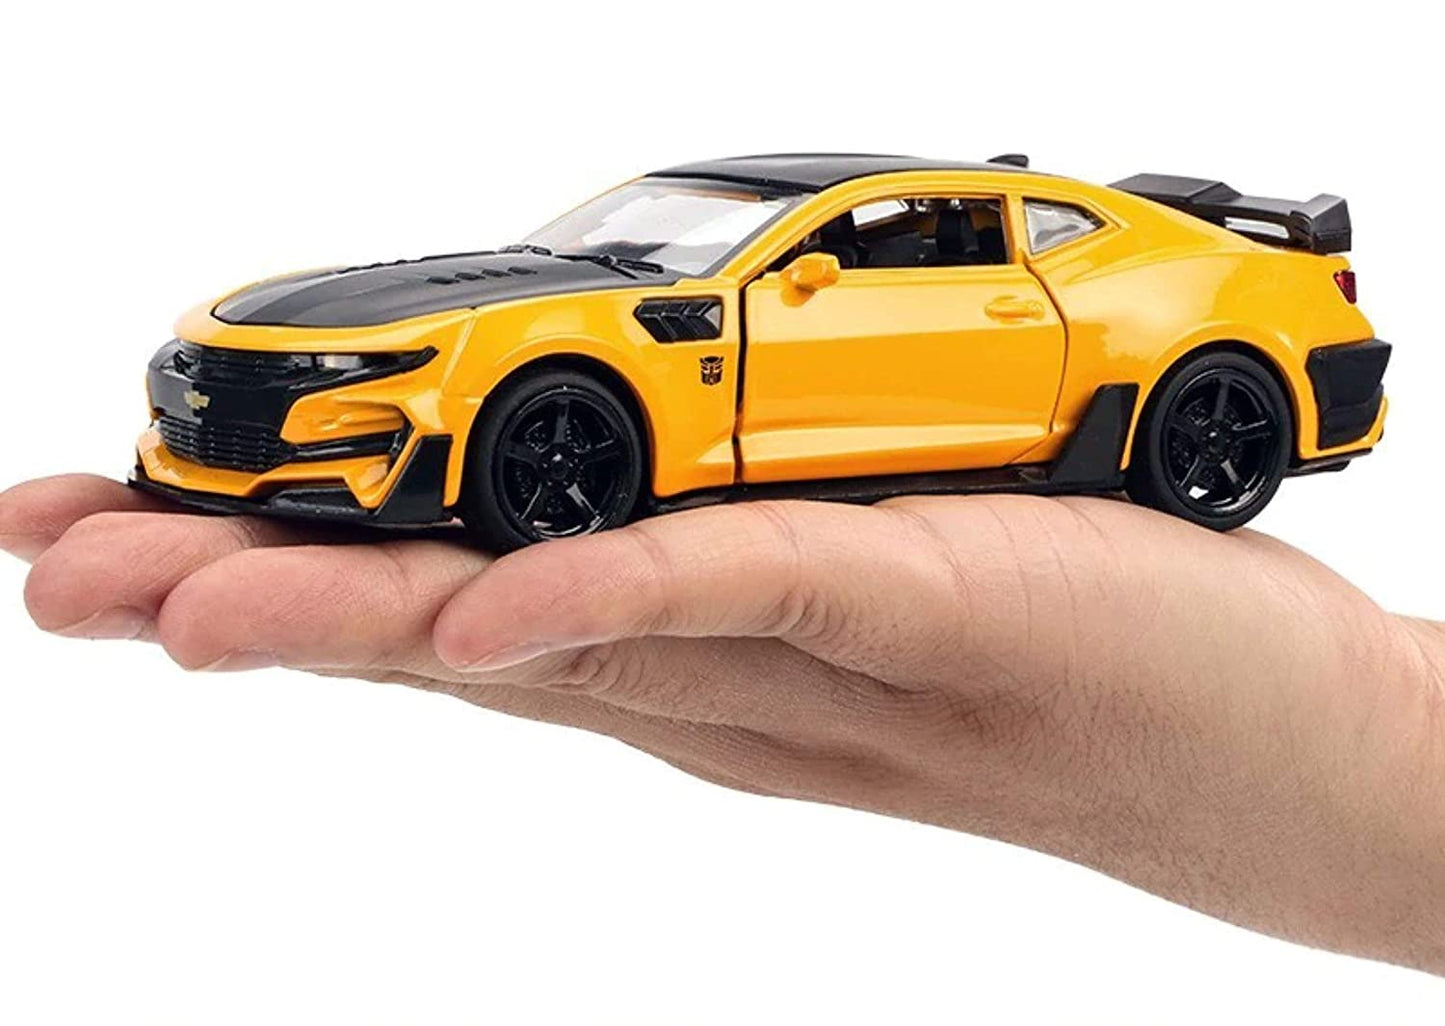 Showpiece For Living Room, Show Piece Gift, Die Cast Metal Body Chevrolet Camaro Pull Back Car (yellow)